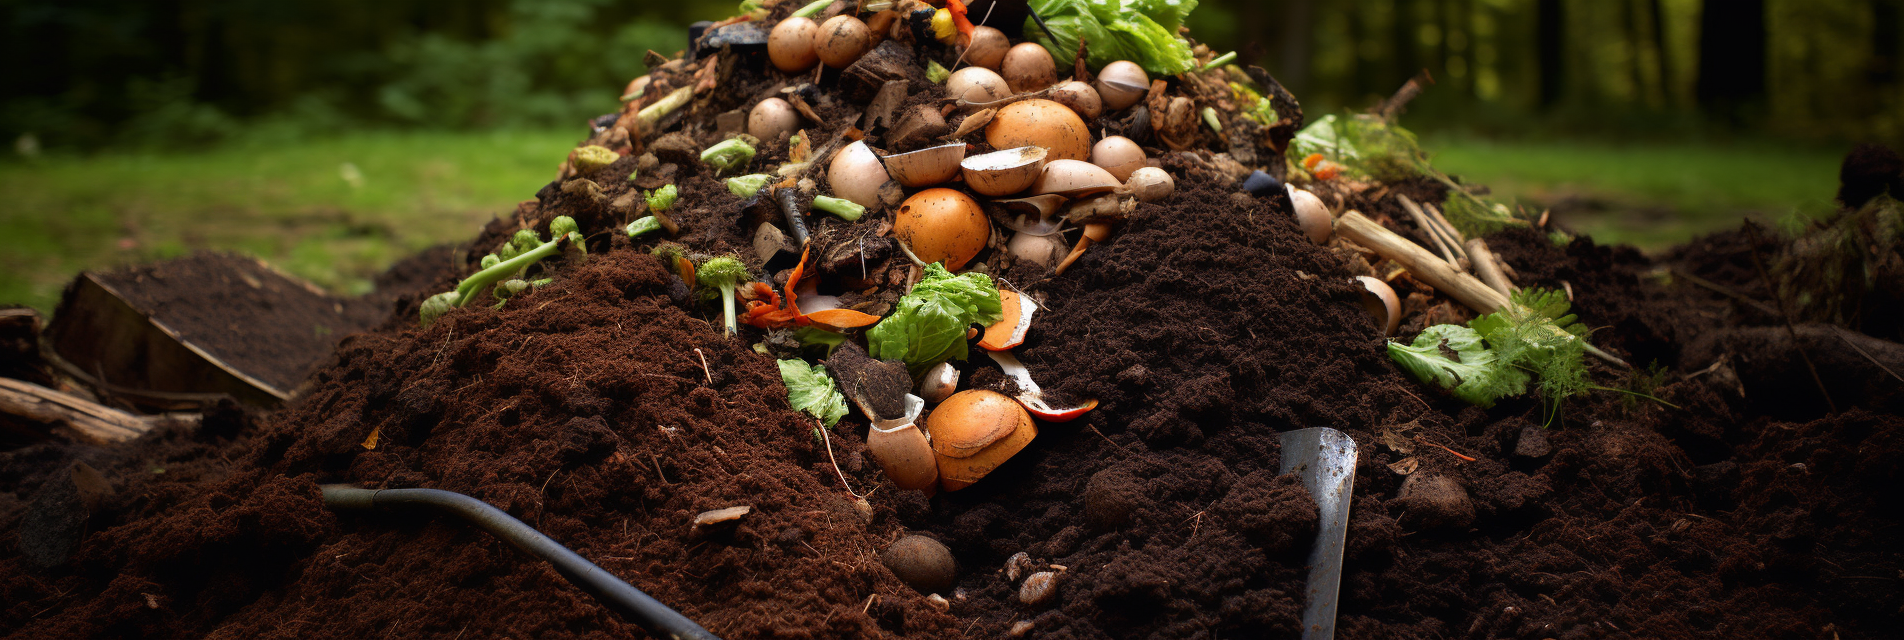 3 principles for successful composting